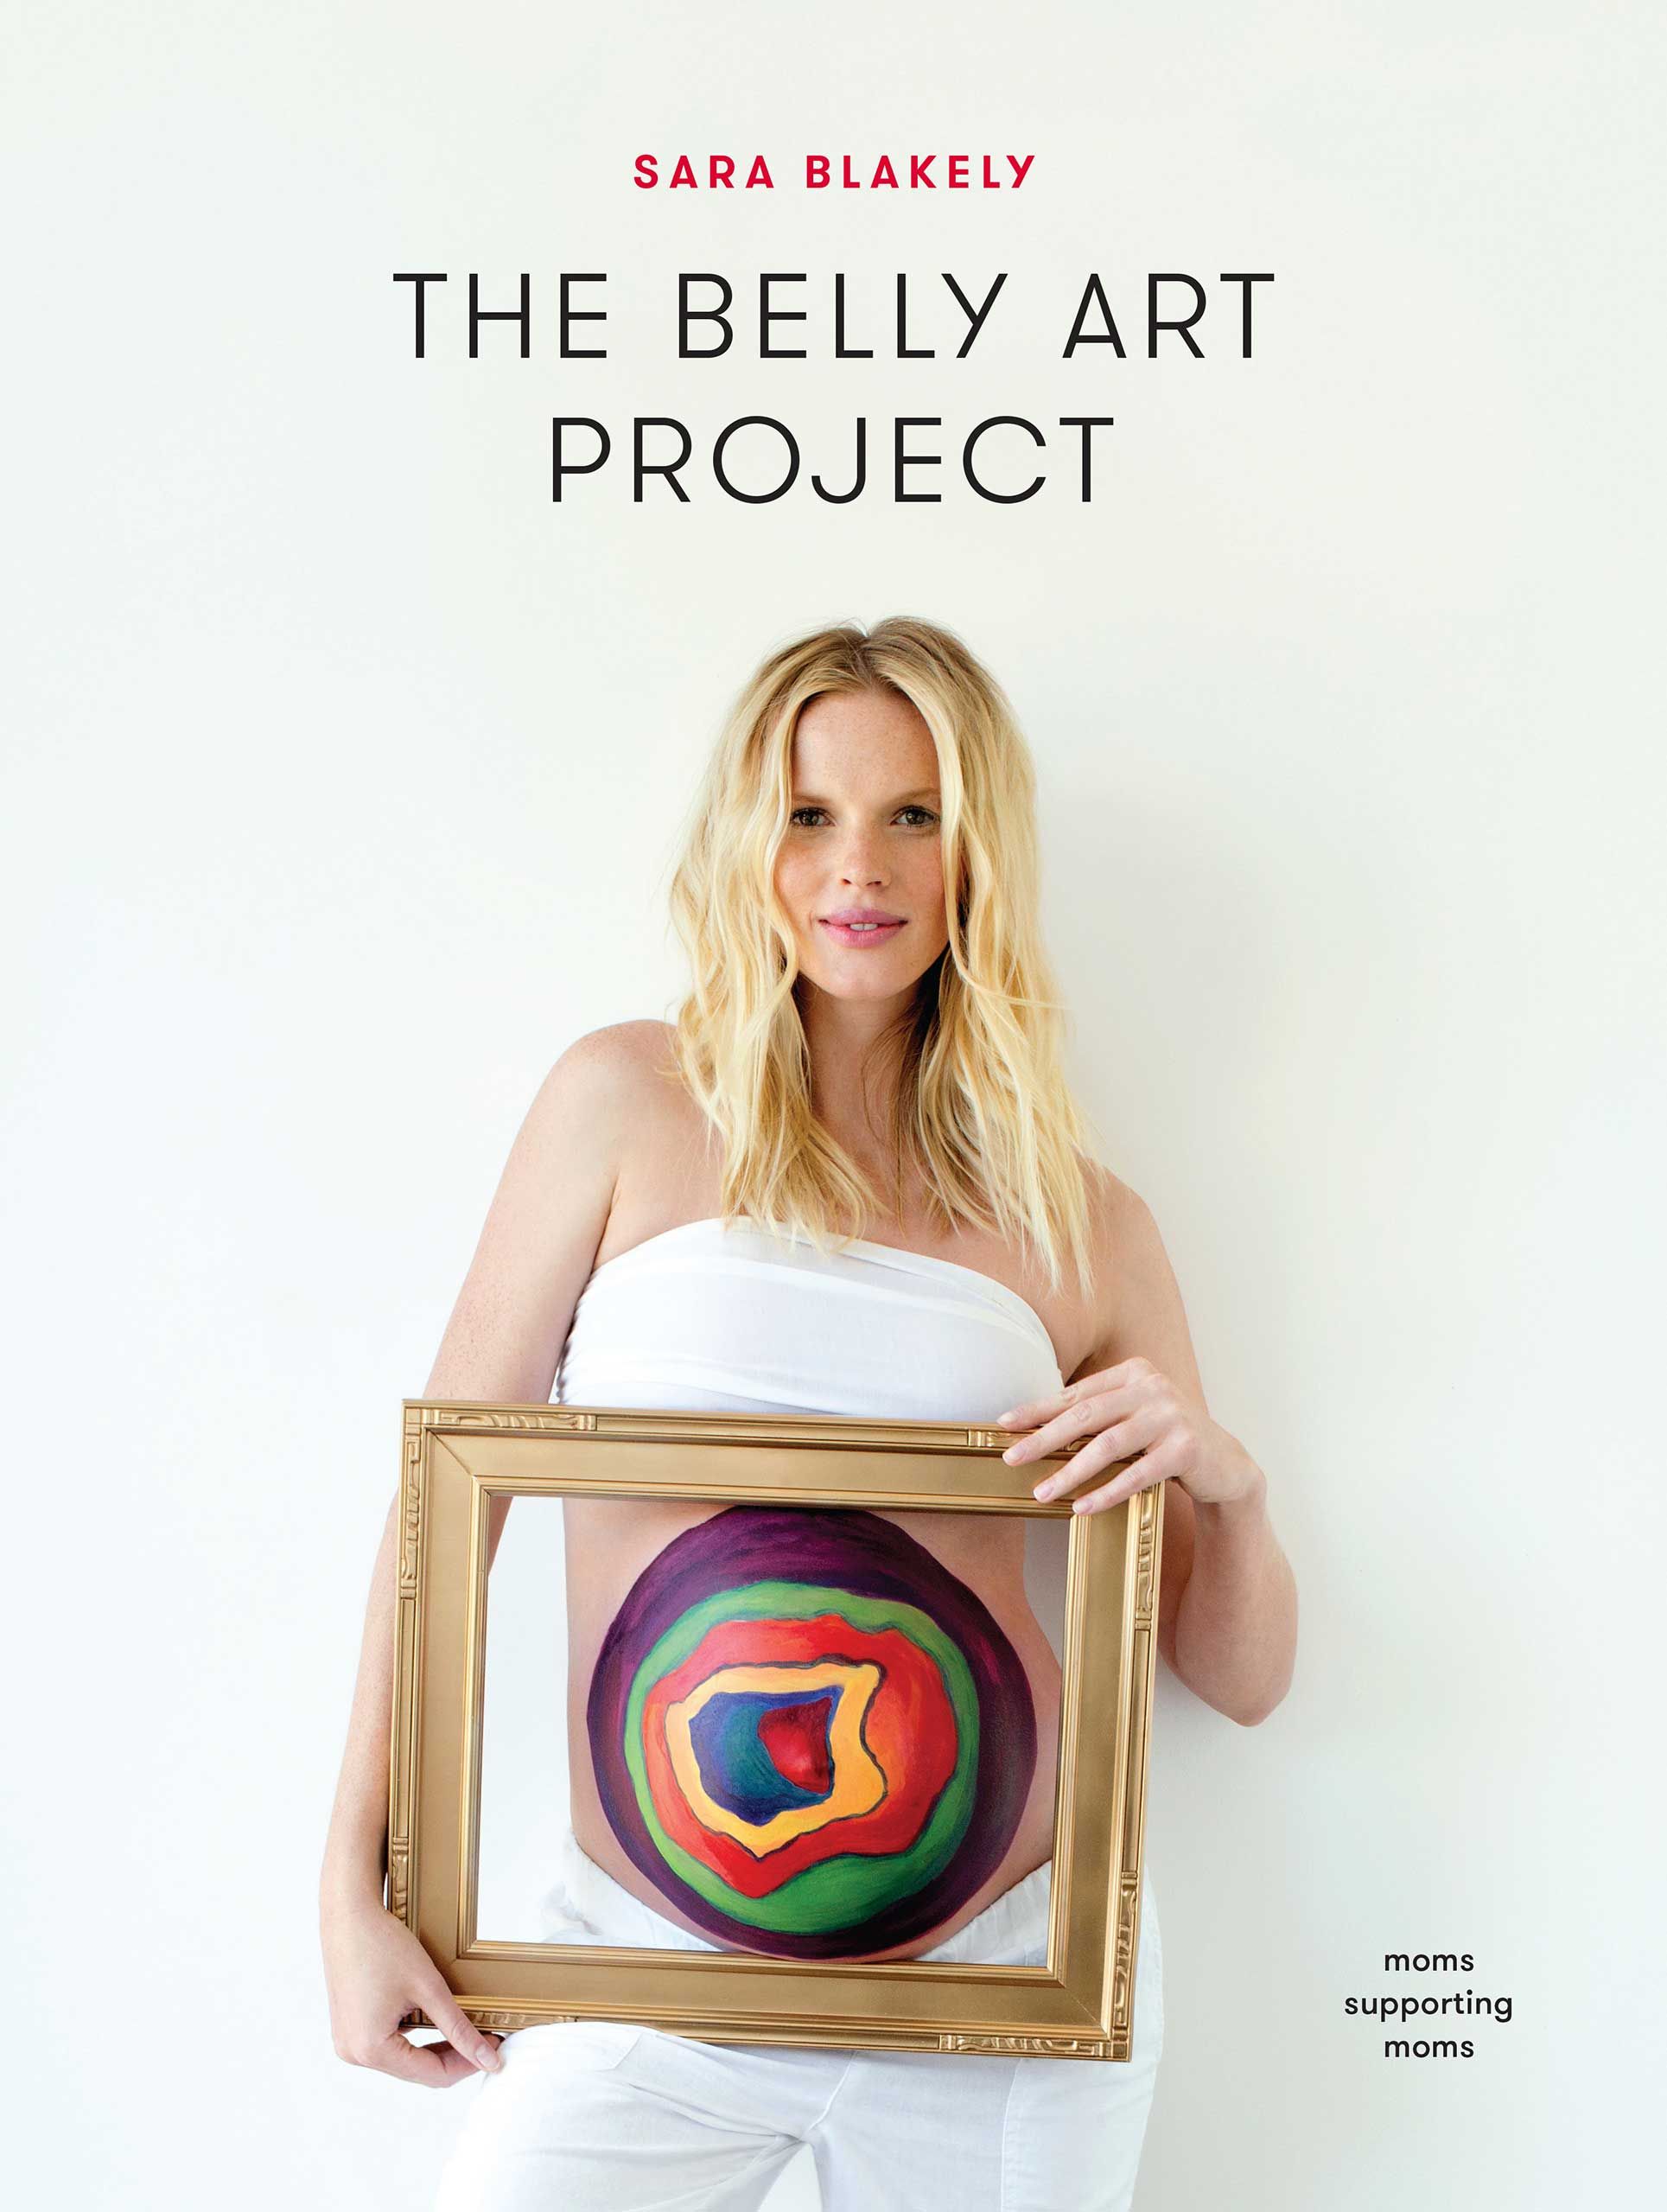 70 Serena Lily And Sara Blakely Celebrate The Launch Of The Belly